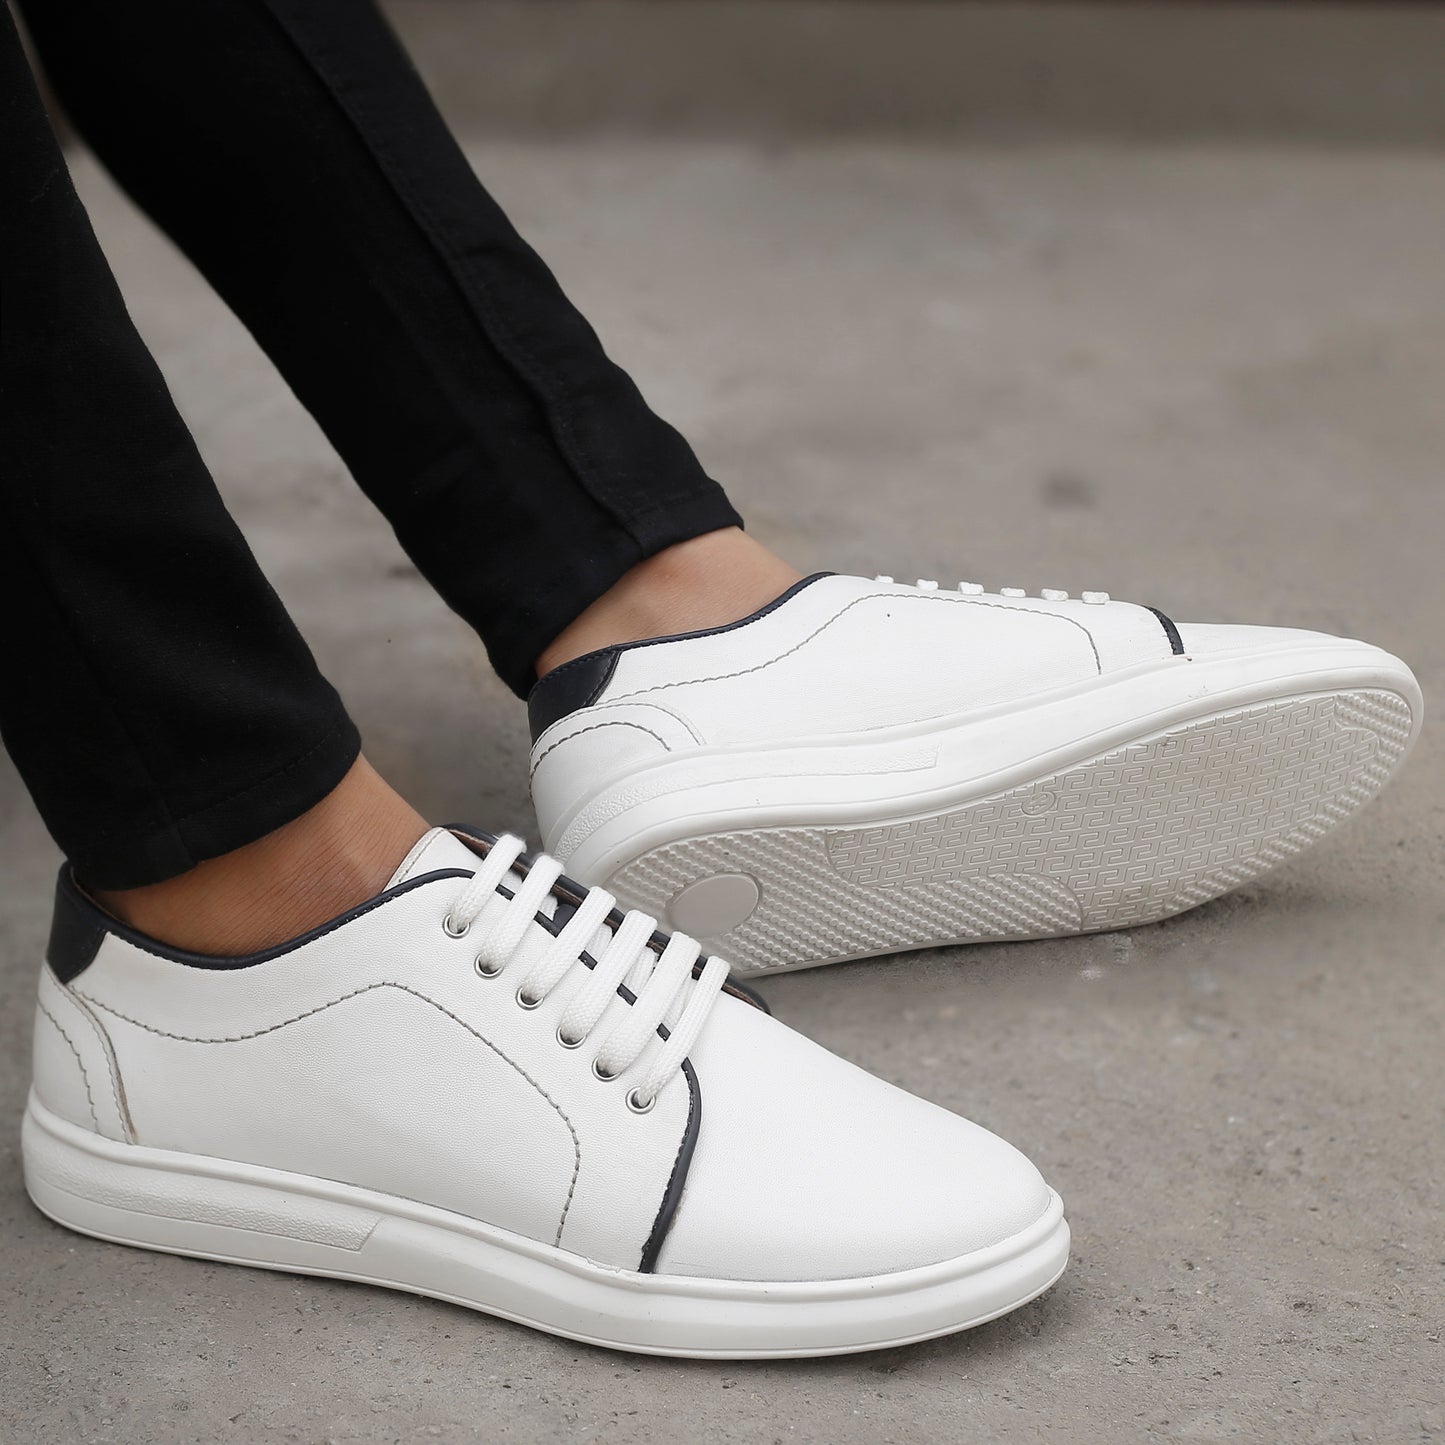 Casual Imported Synthetic Upper Material Latest Sneakers For Men